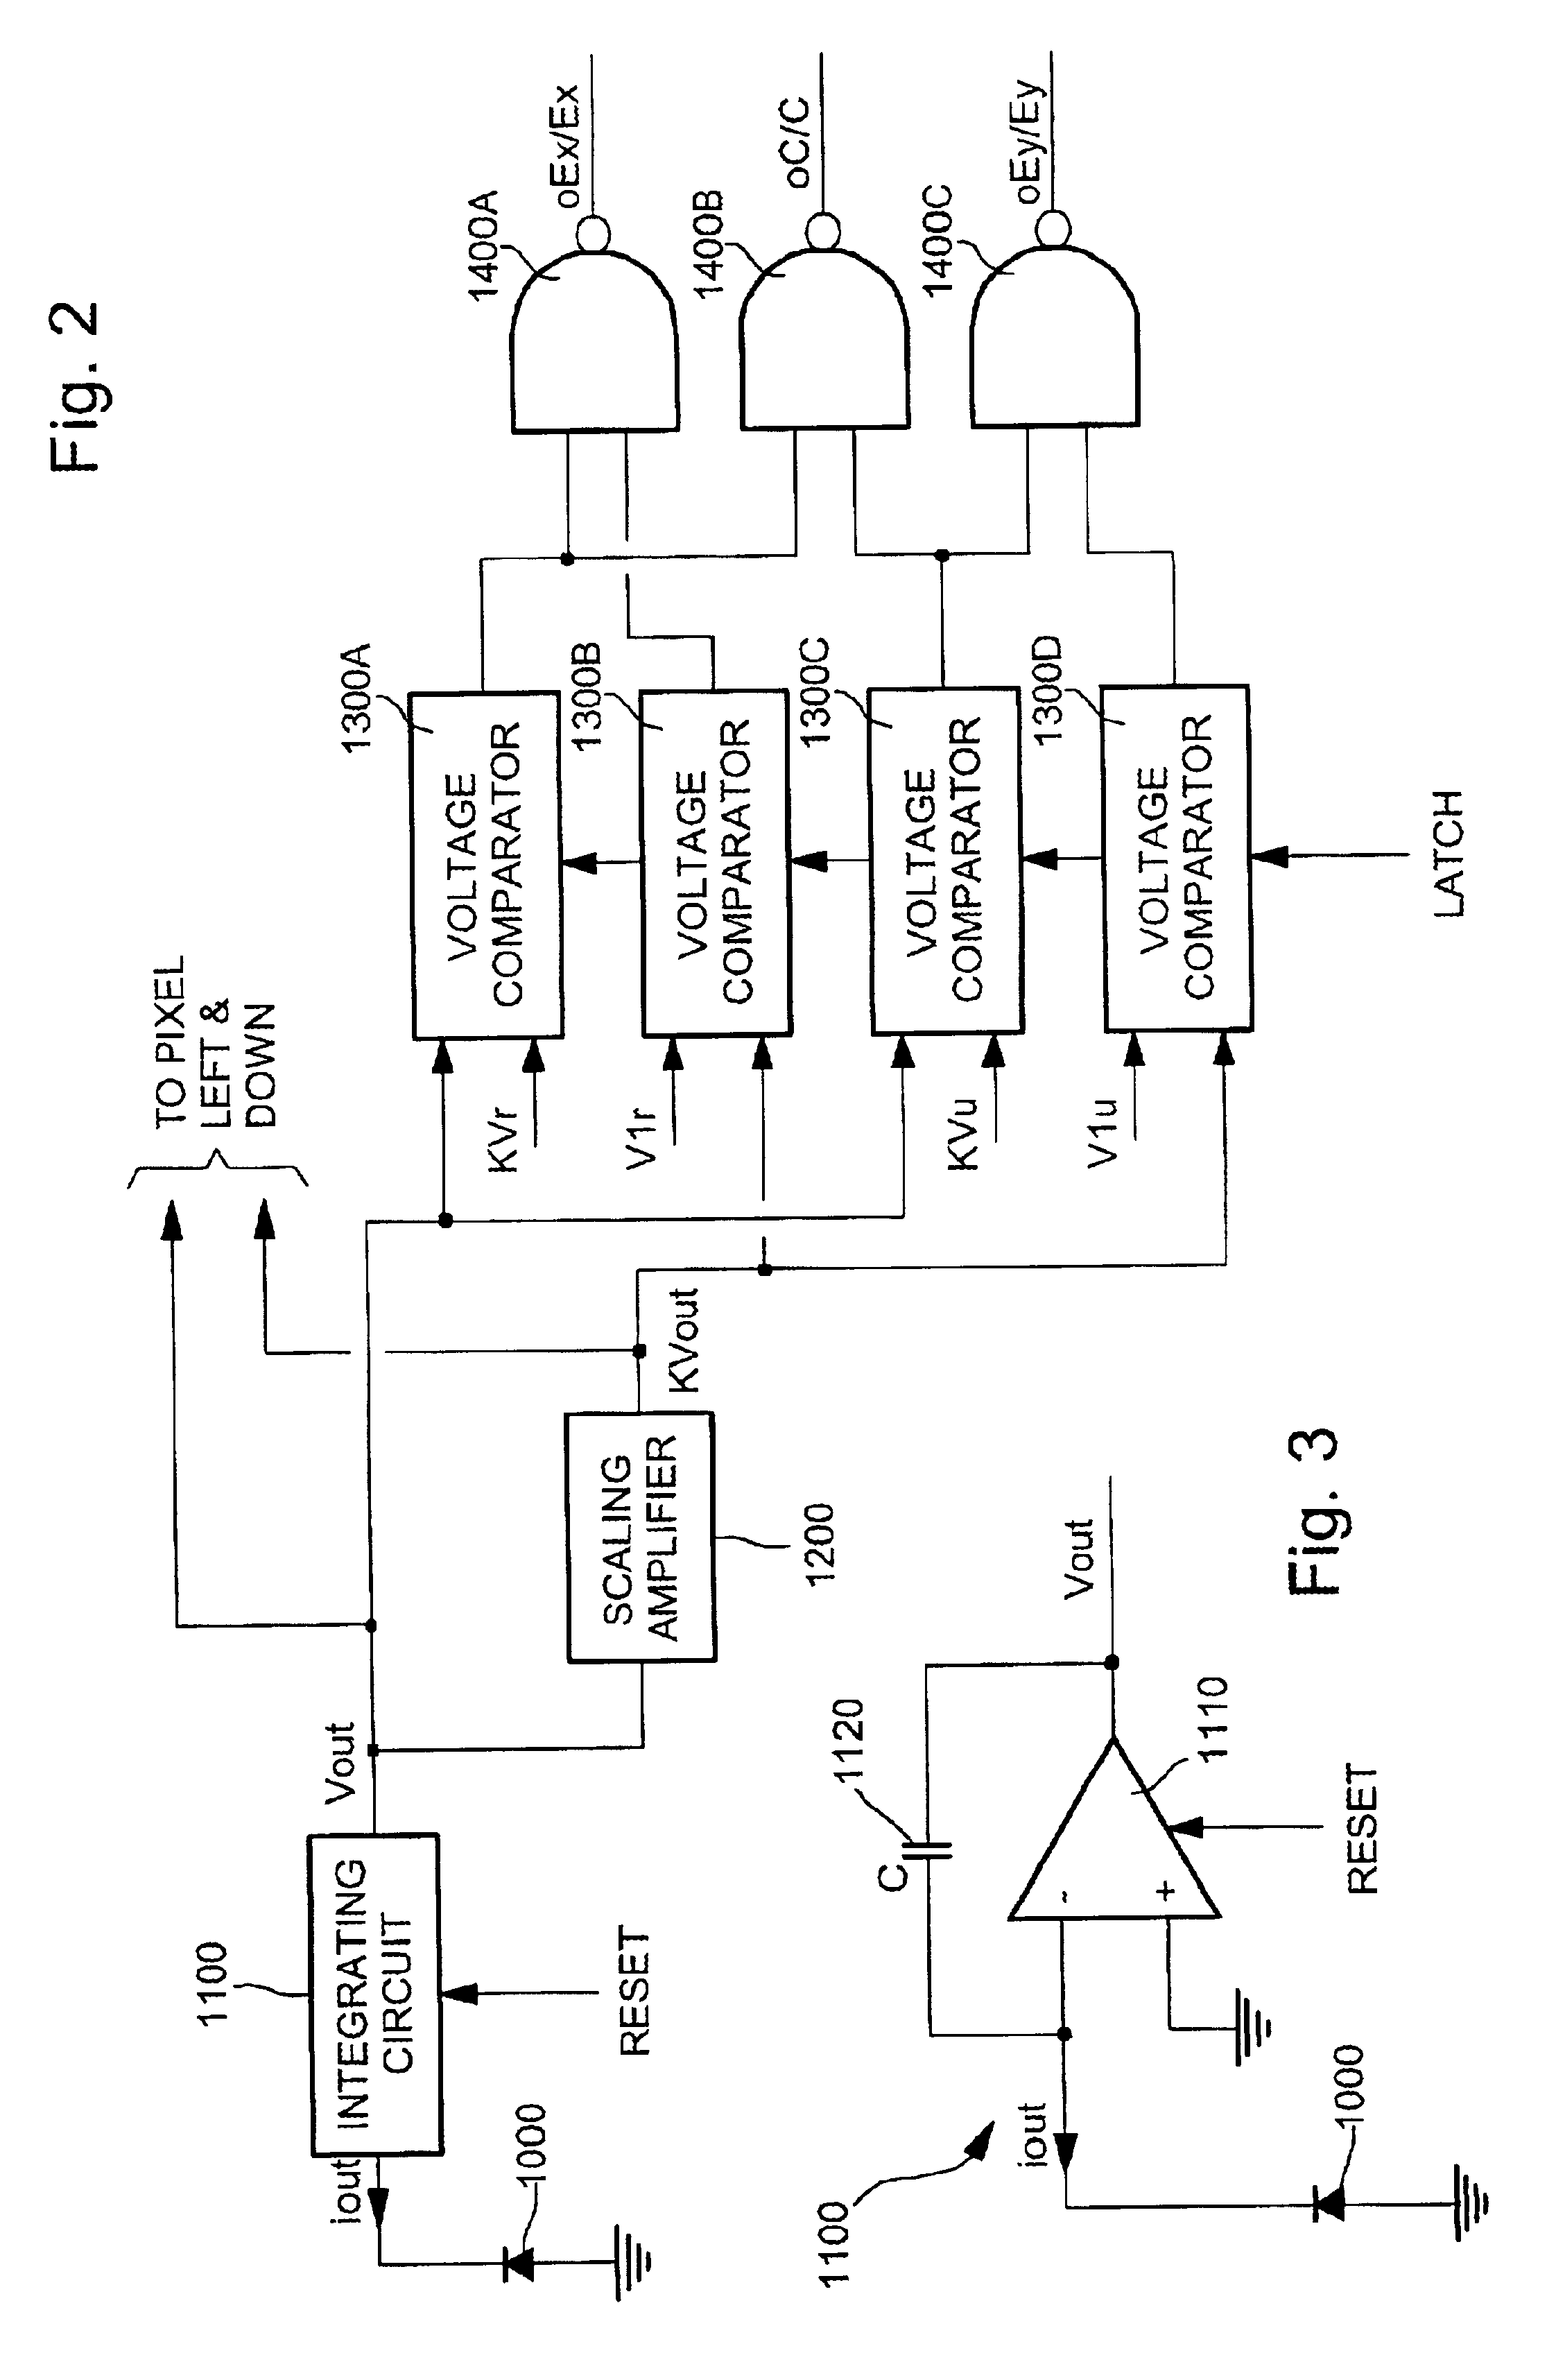 Method, sensing device and optical pointing device including a sensing device for comparing light intensity between pixels